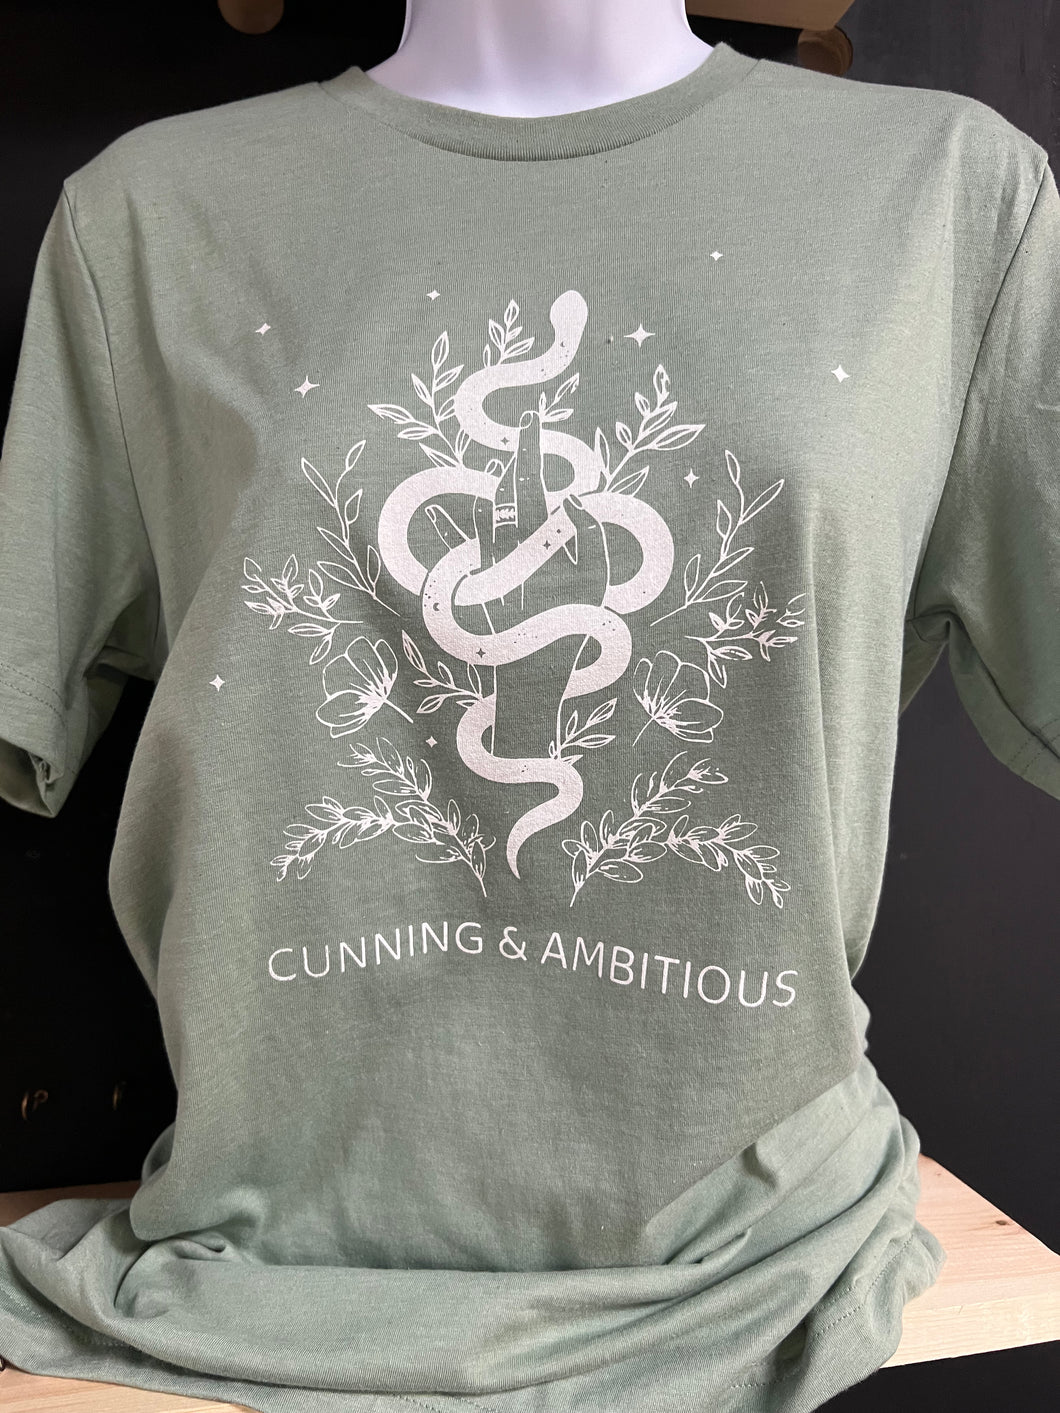 CUNNING + AMBITIOUS